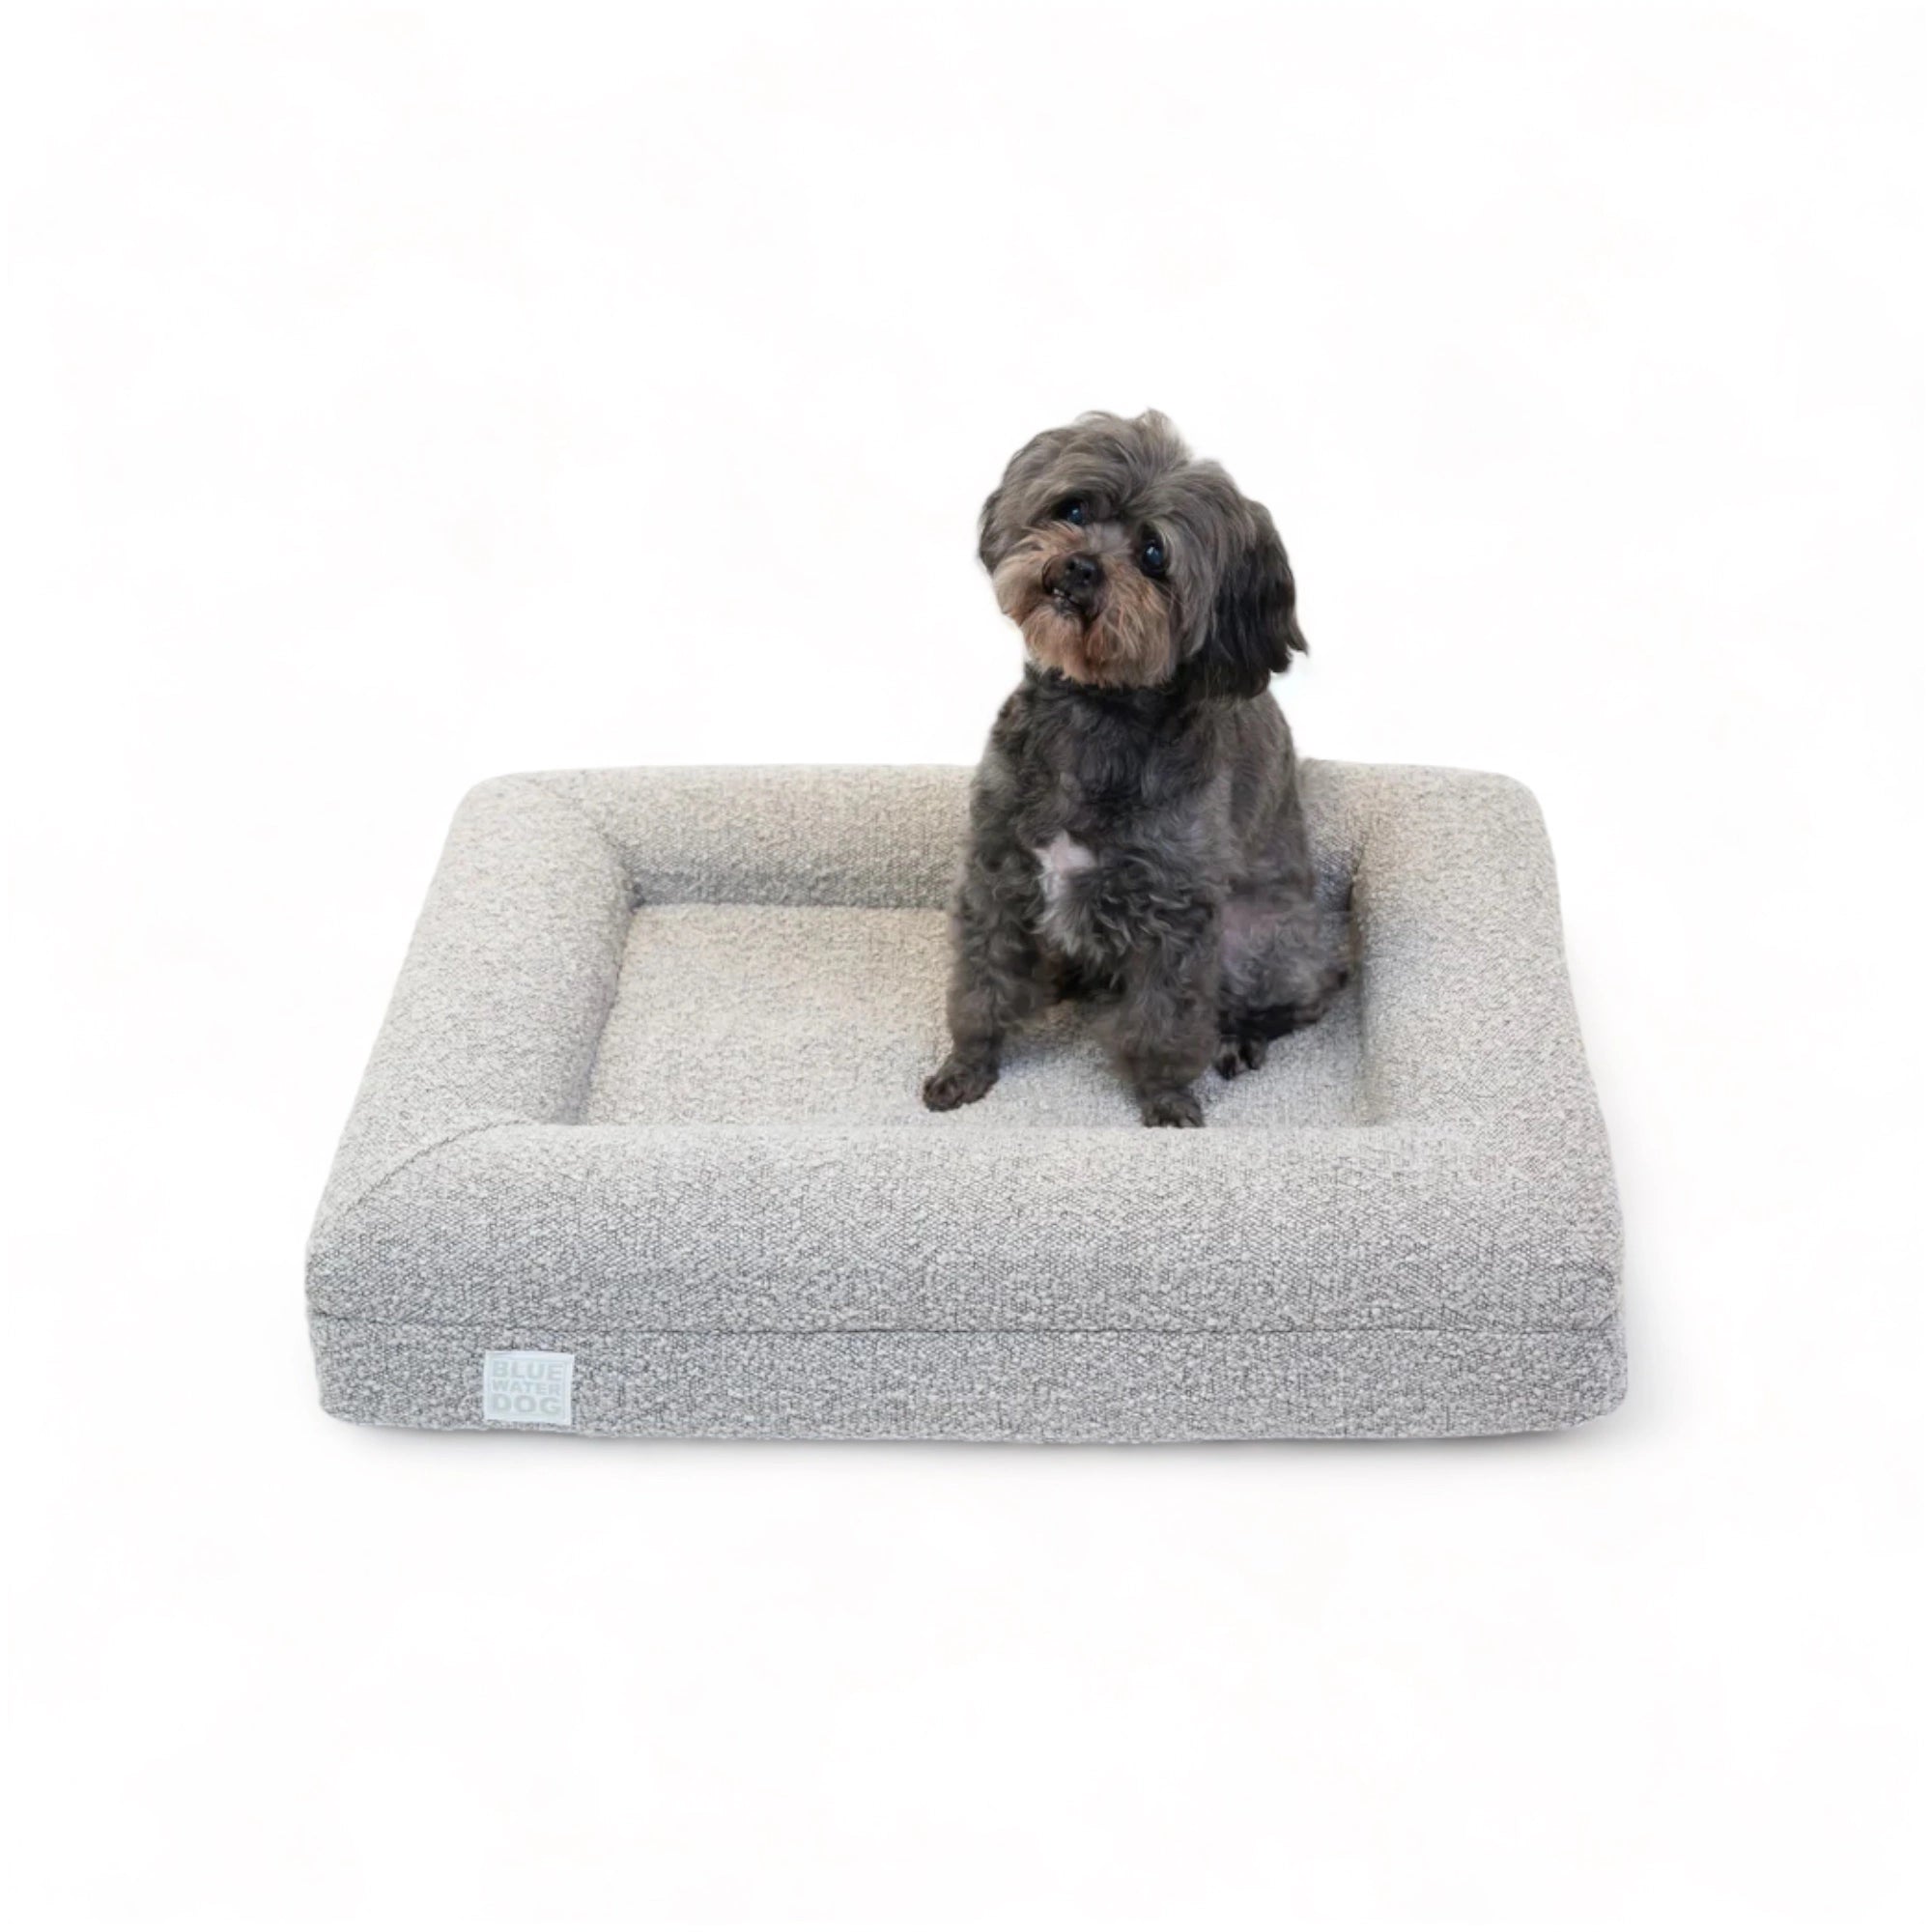 Shihpoo sitting on a small, sand-colored orthopedic memory foam boucle dog bed.